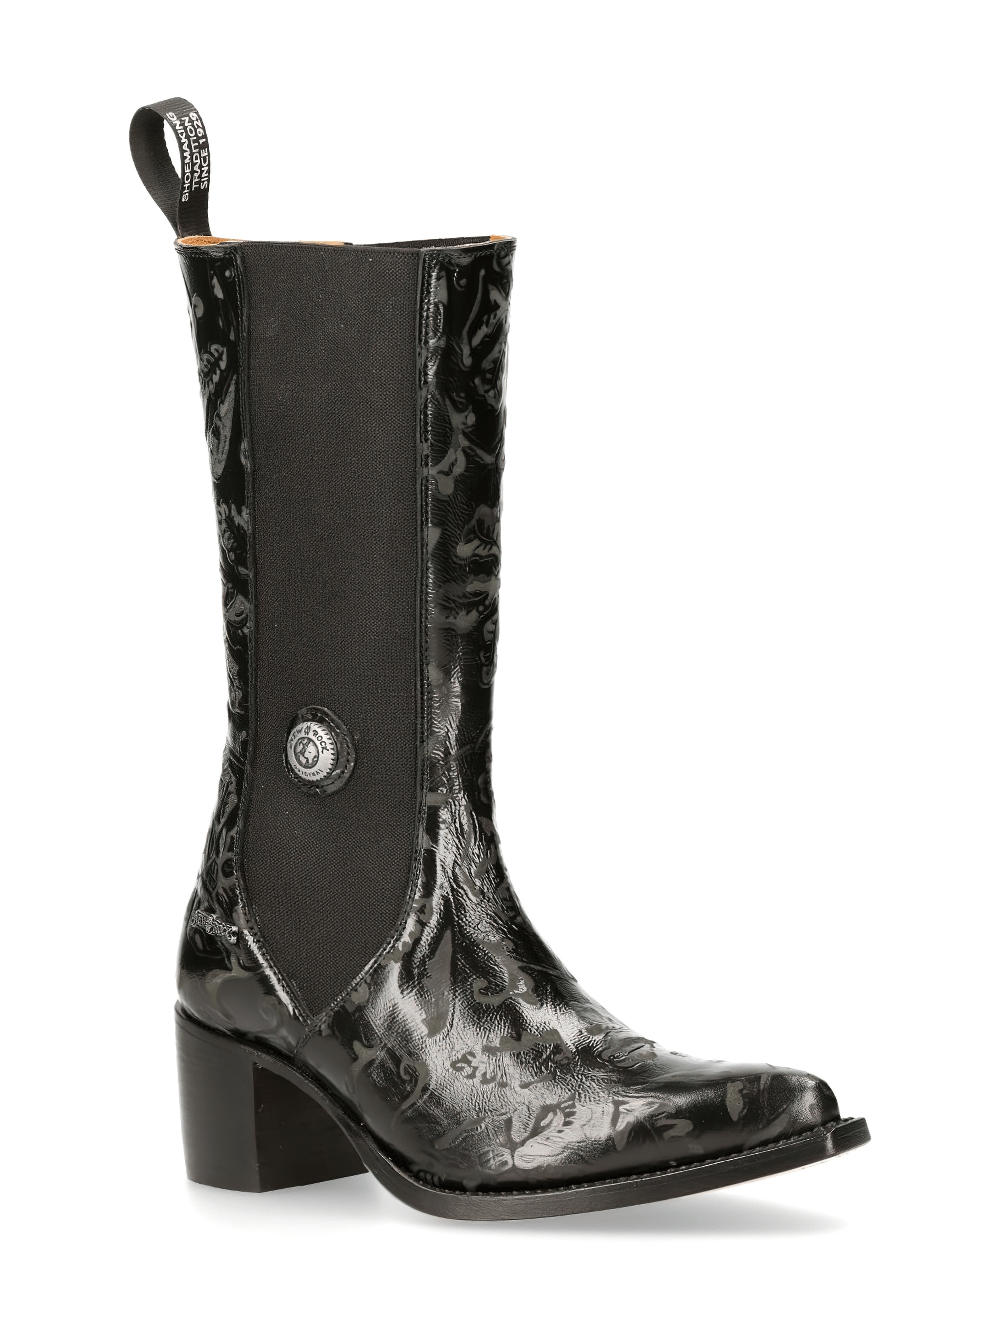 NEW ROCK Lady's Western Elastic Boots with Metallic Detail